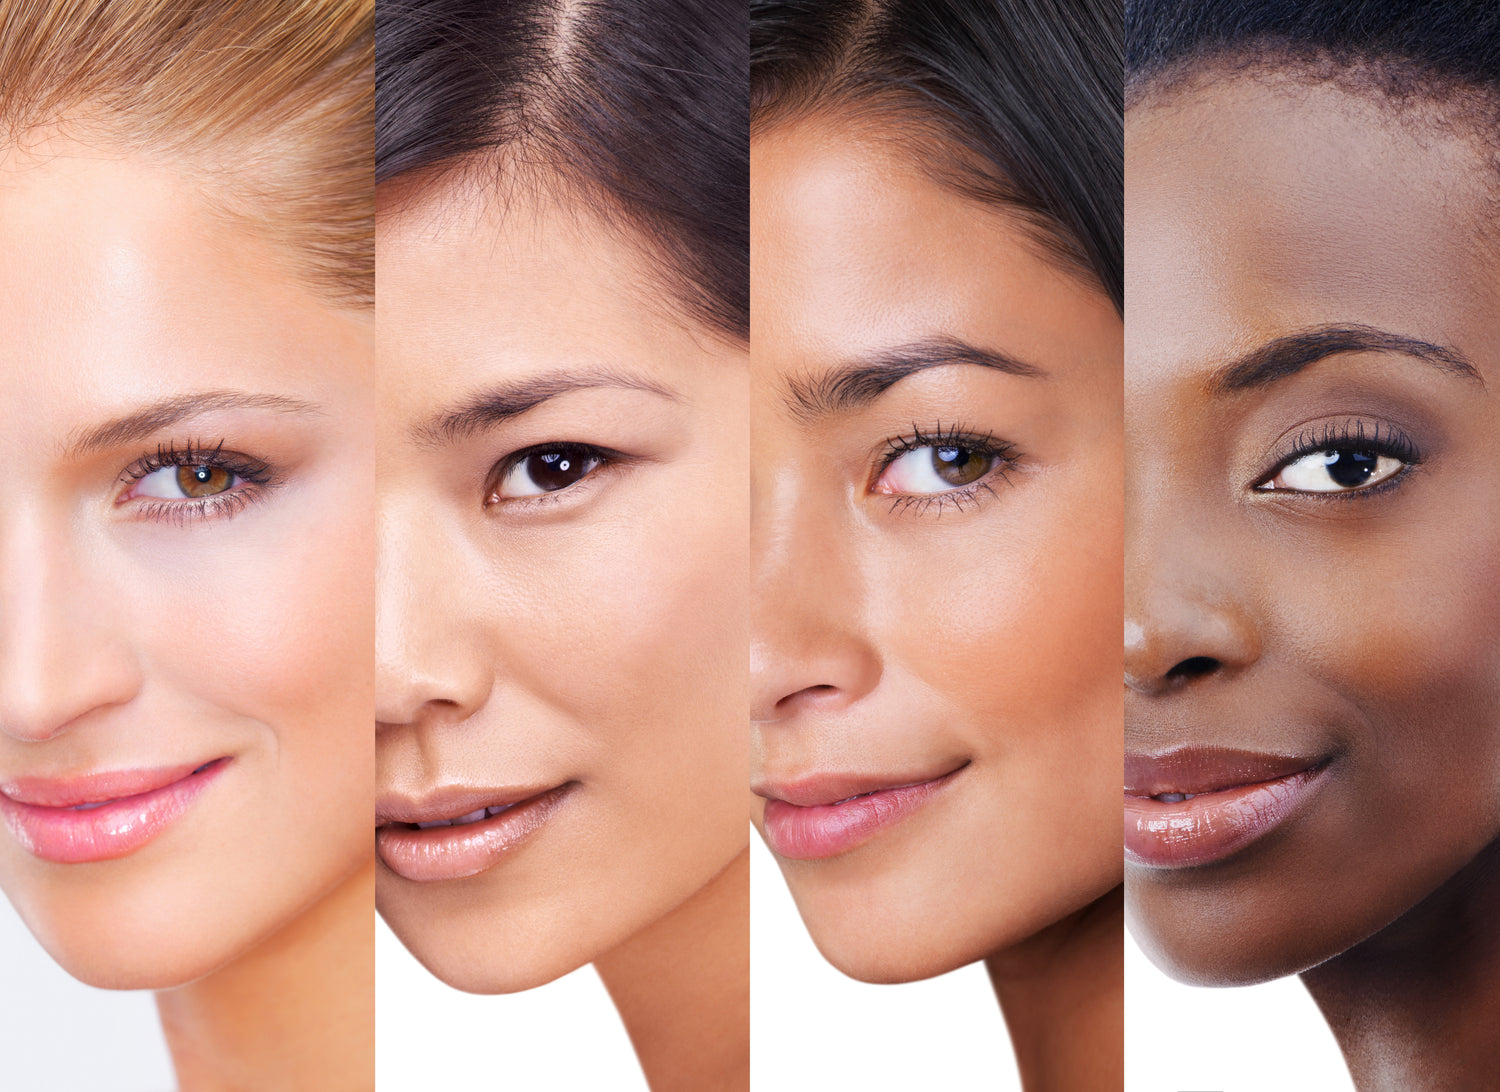 4 women from different ethnicities, with clean & radiant skin, smiling at the camera 